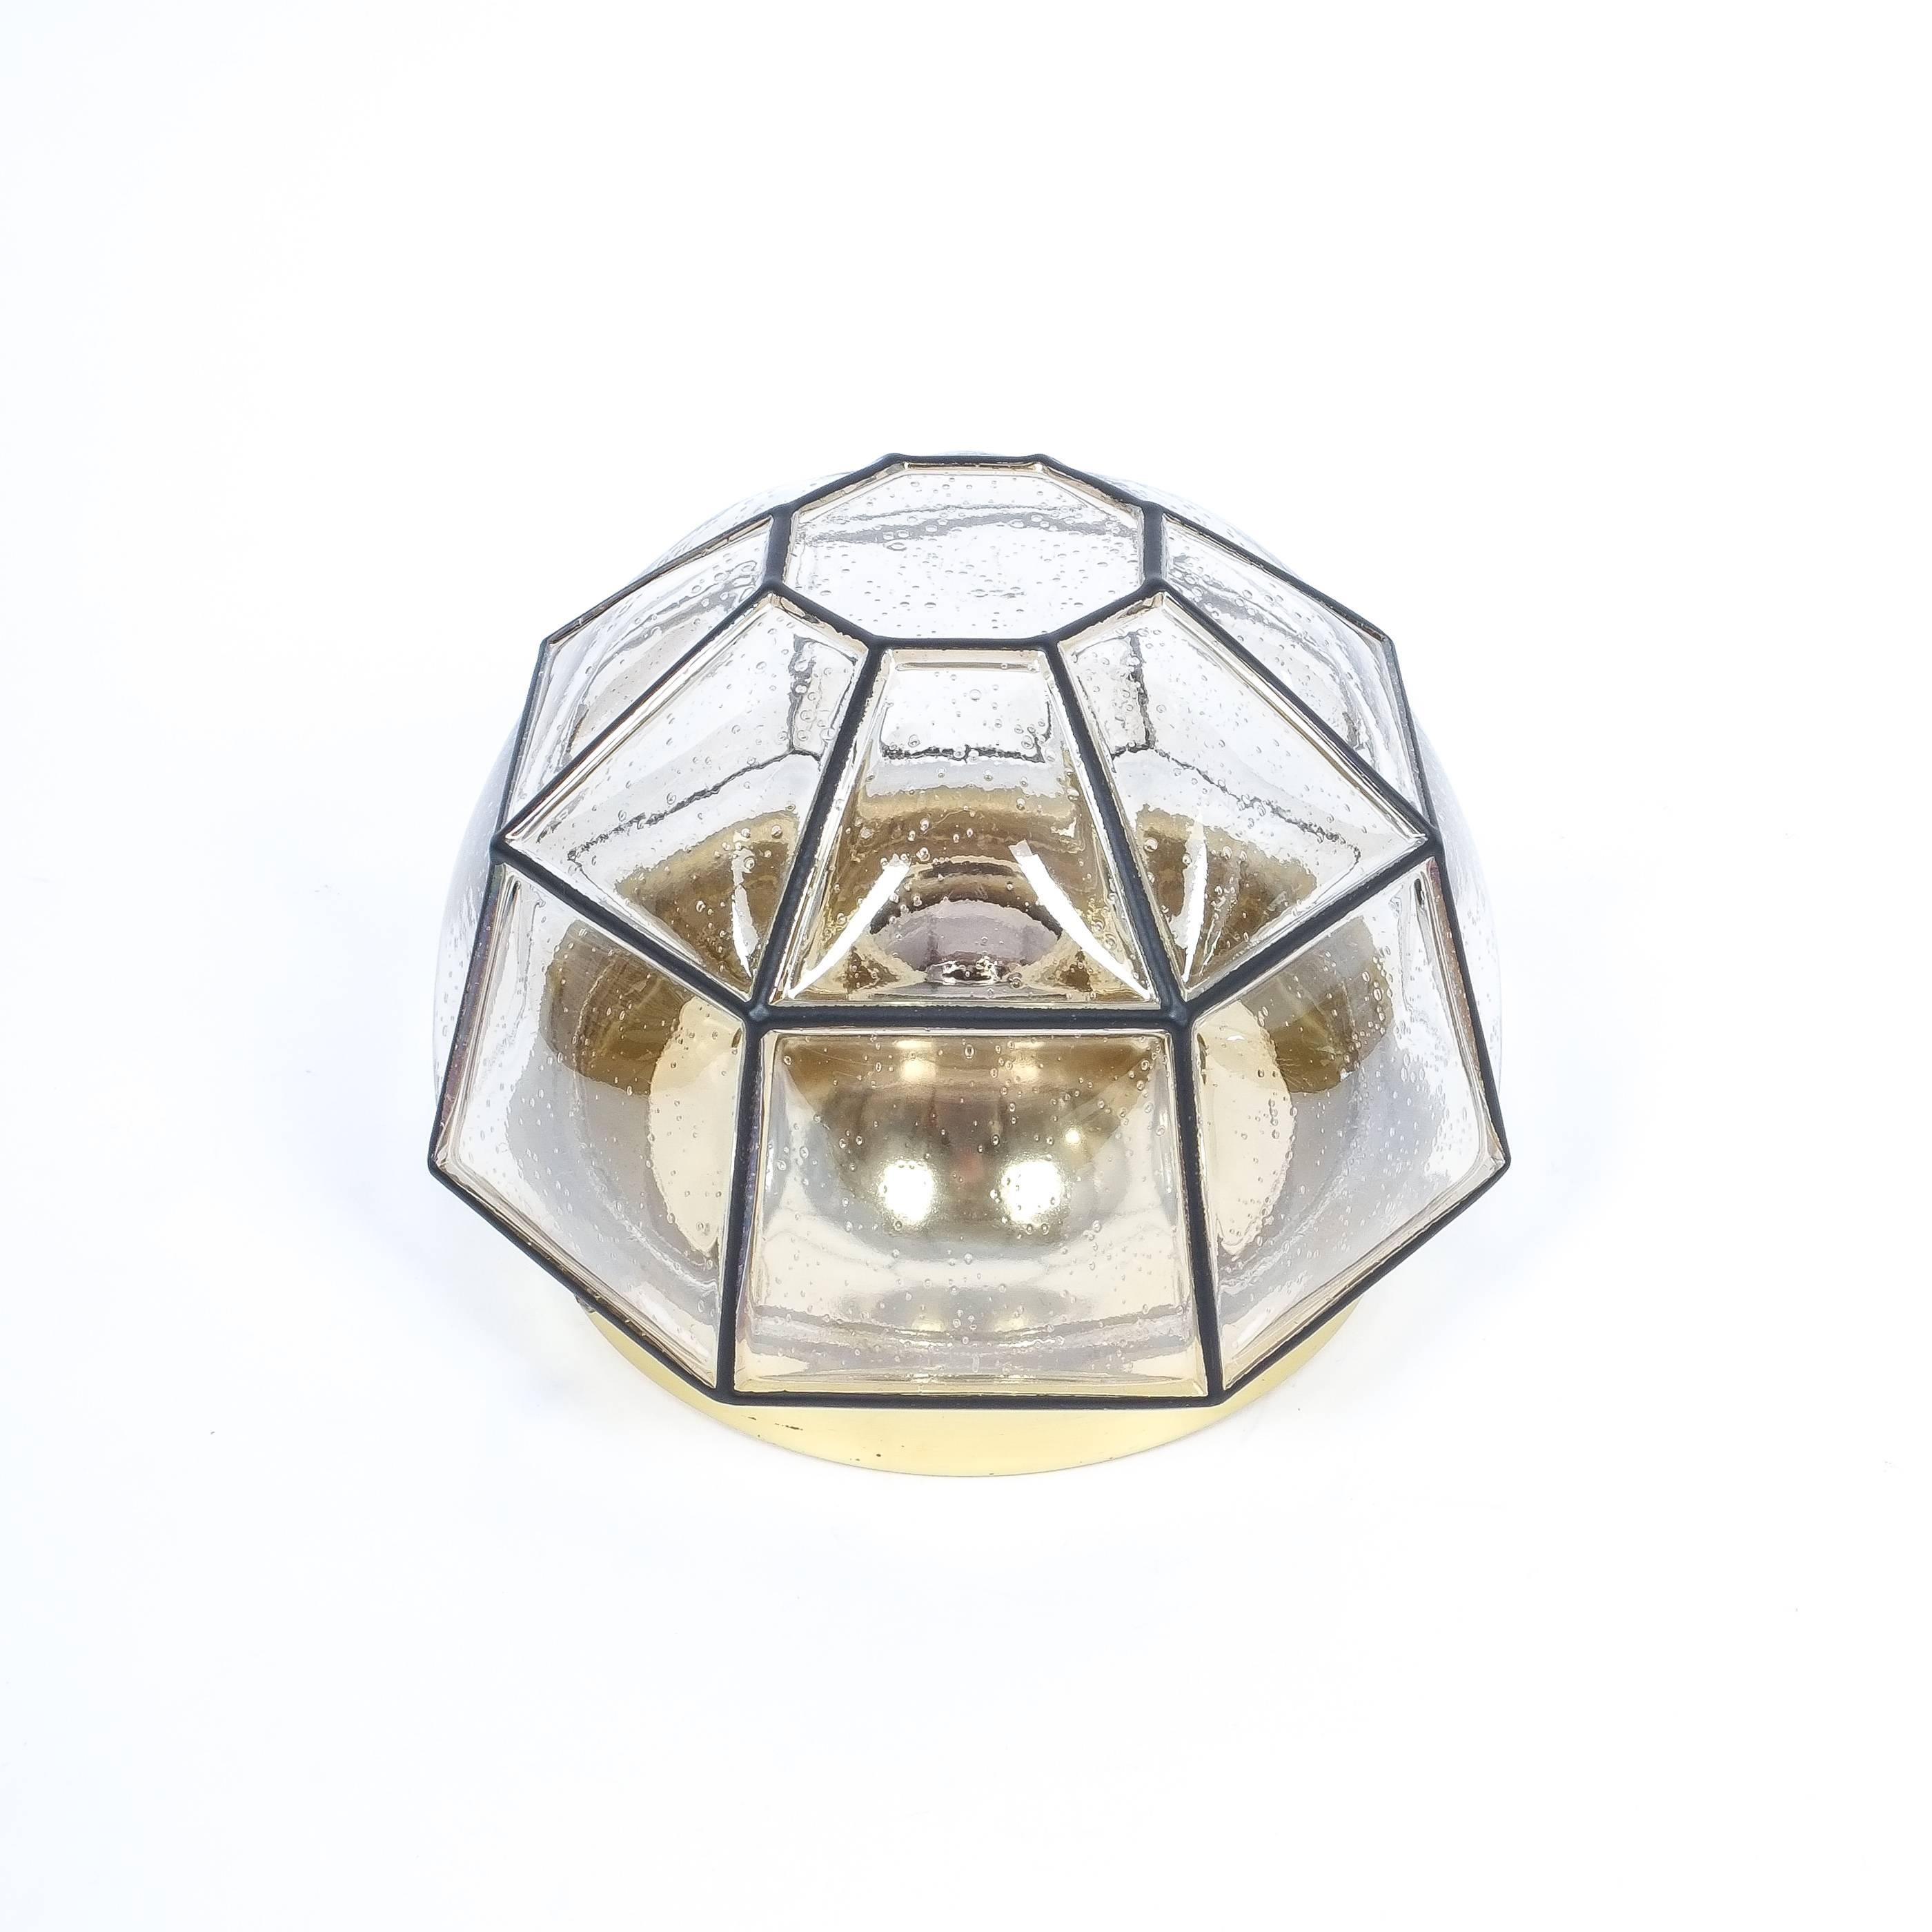 Pair of beautifully shaped clear glass flush mounts by Limburg, Germany. Polygonal shaped flush mounts with black grid accents and brass hardware., newly rewired (110-220V) , a single bulb 75W max. per lamp. Priced as a pair. Please scroll down to